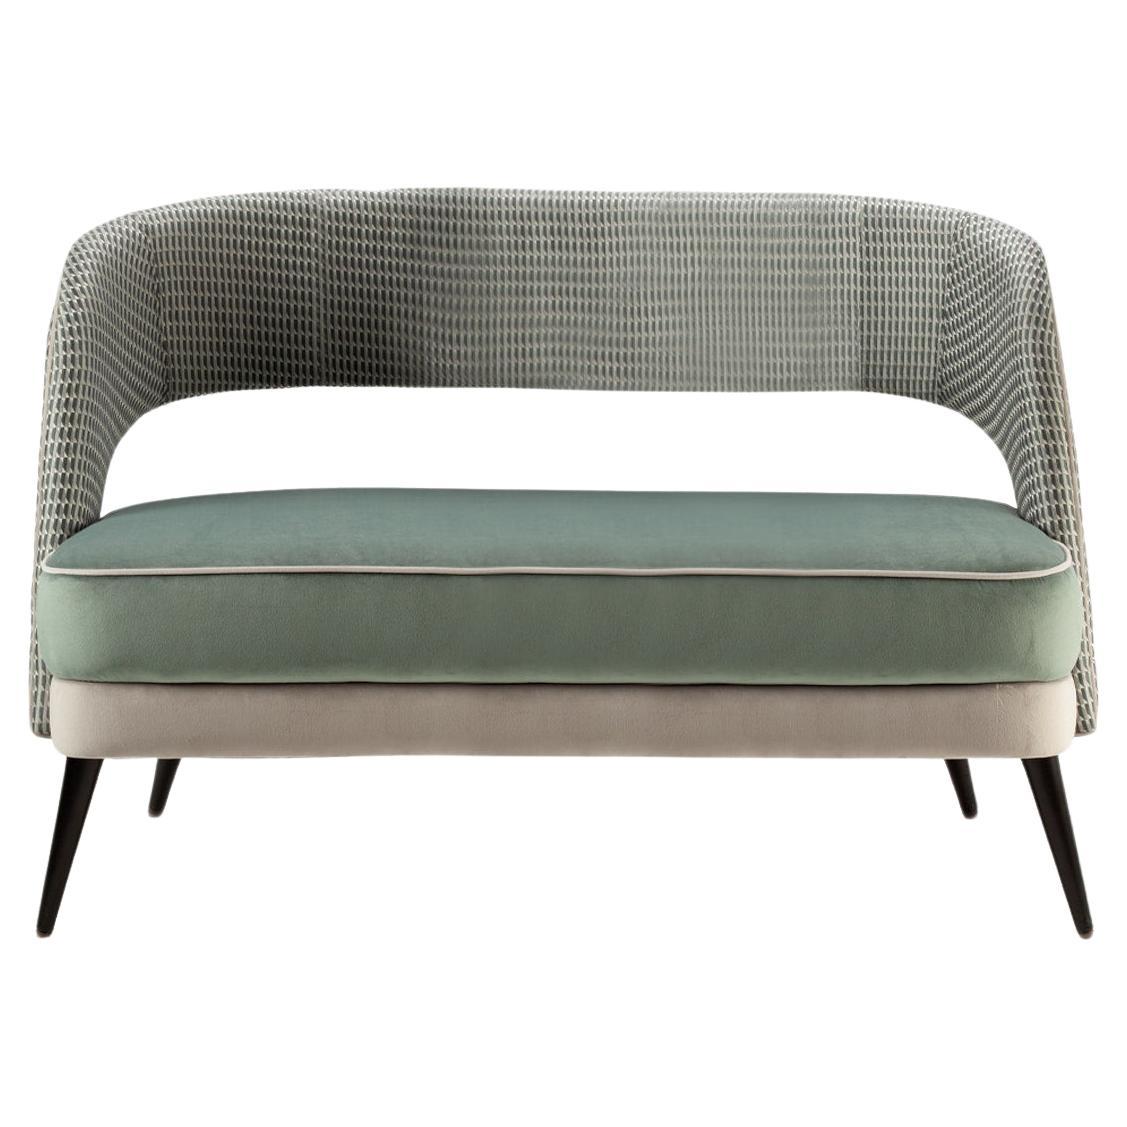 Ava Settee 2-Seat Sea Green Seat and Textured Grey Backrest Wooden Feet